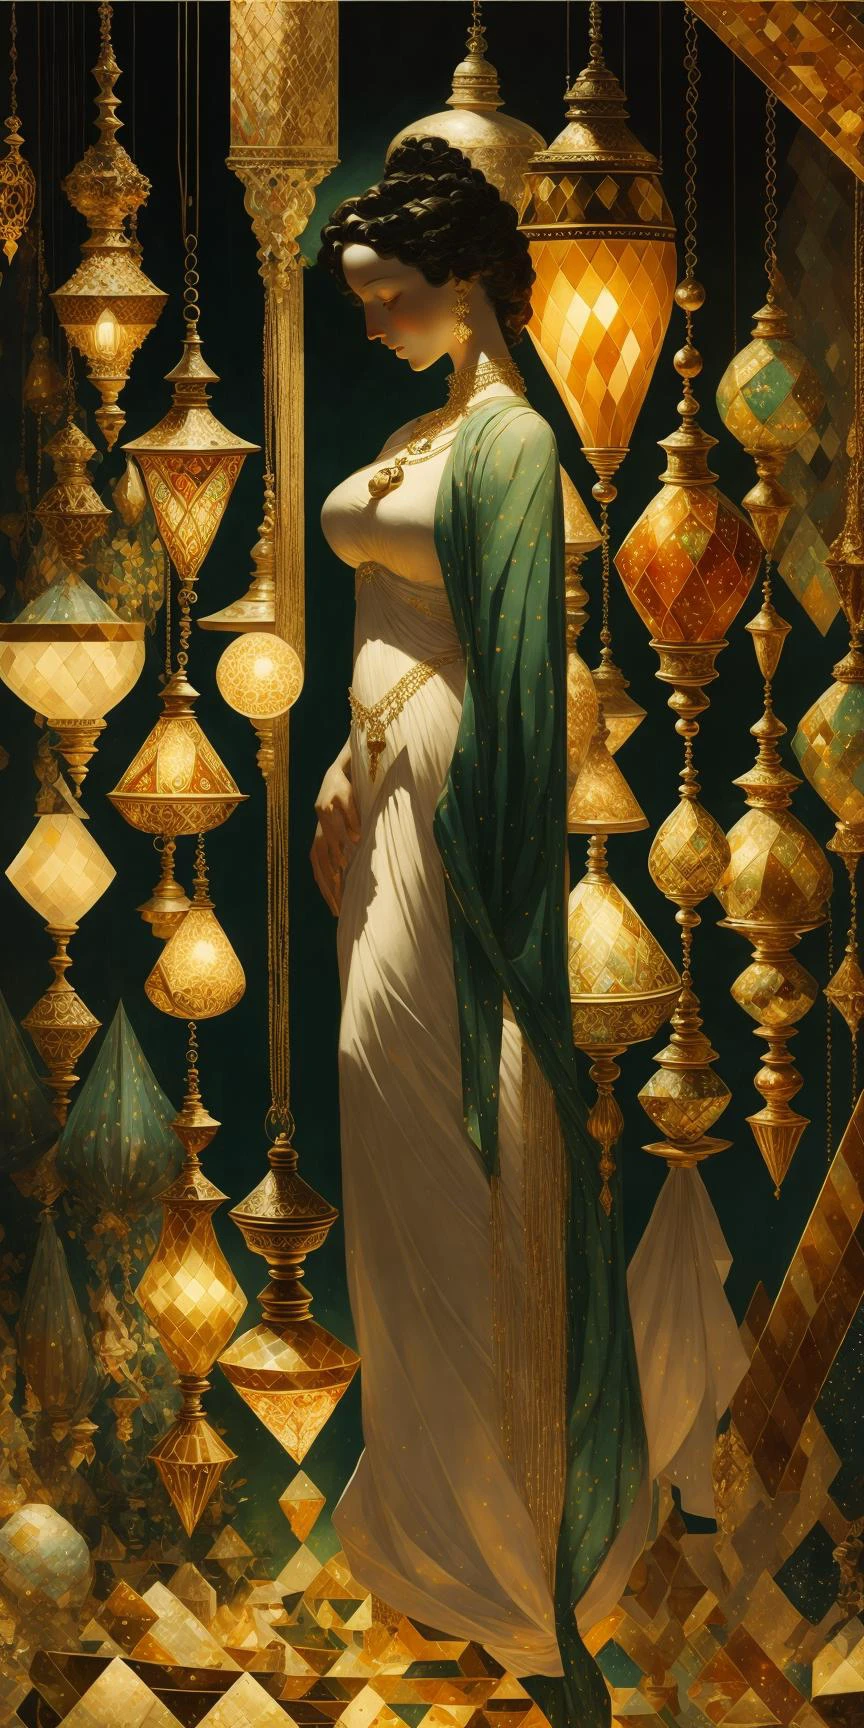 A [ curvy | voluptuous |  beautiful ]   gypsy odalisque 
in the middle of hanging turkish pendant lamps made of multicolored mosaic glass shade
,Kay Nielsen's [ colorful | vibrant ]  ( ( HDR) masterpiece ( in geometric CCDDA  artstyle ) )